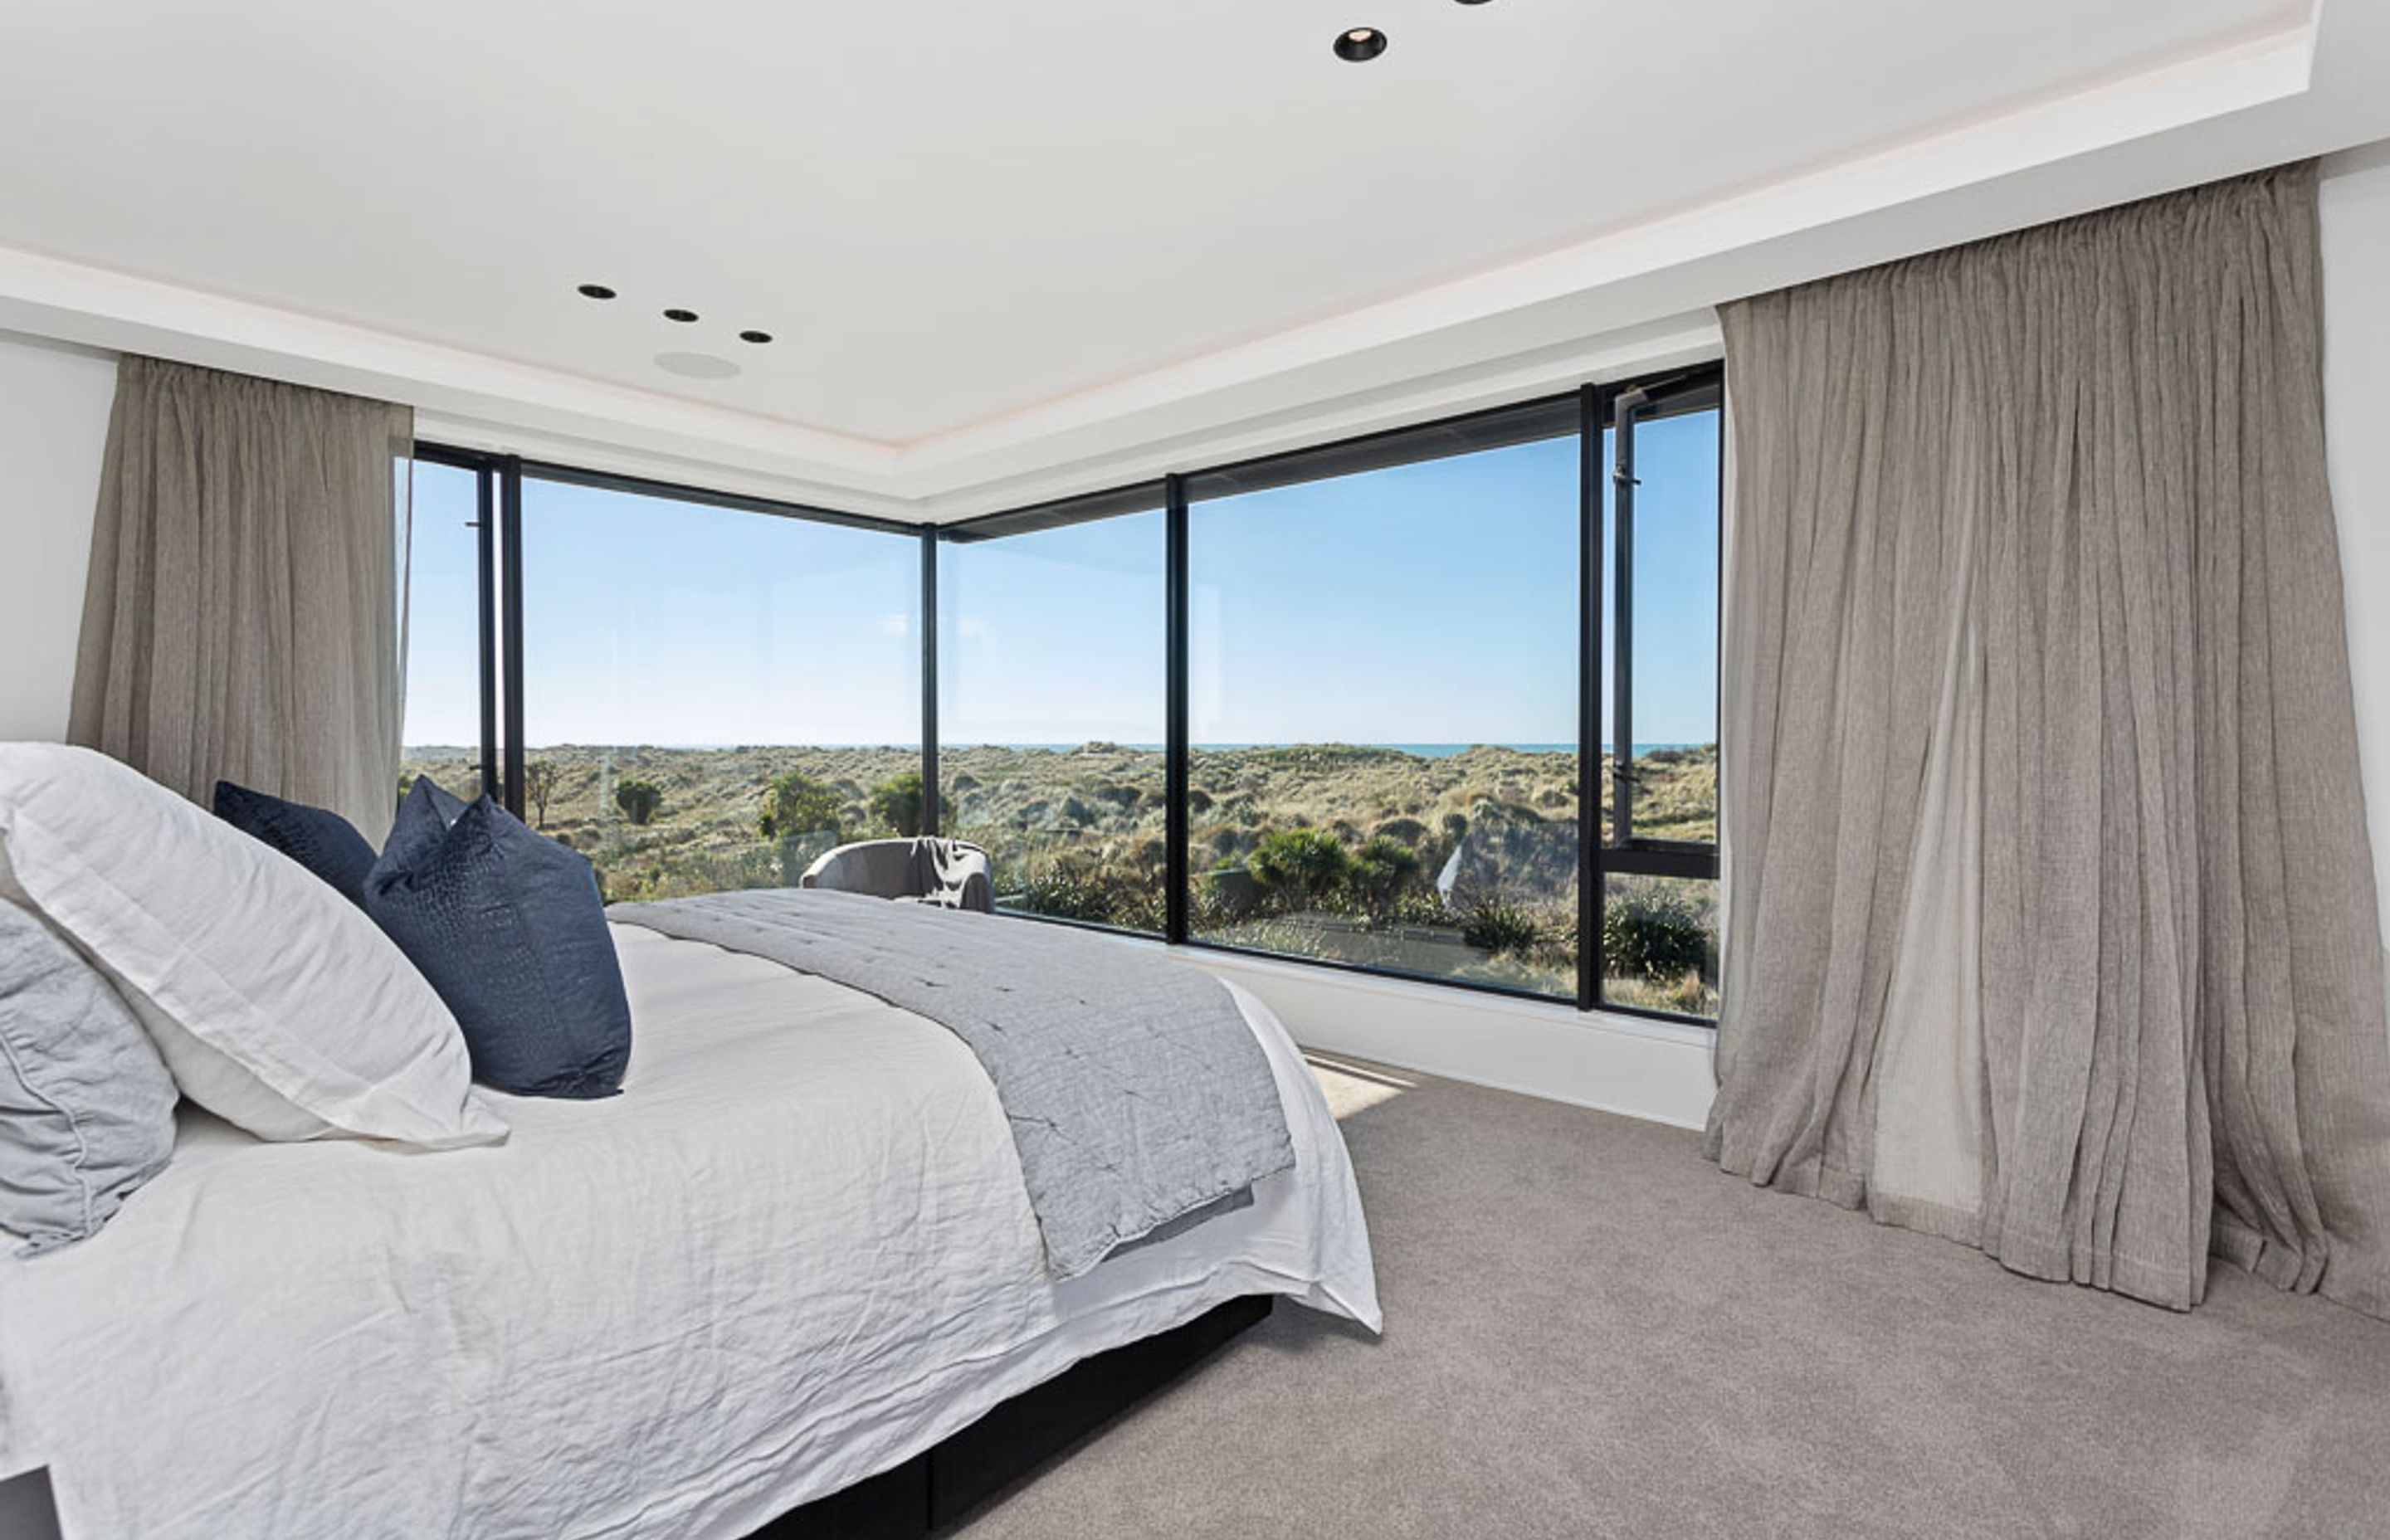 The master bedroom takes in stunning views.